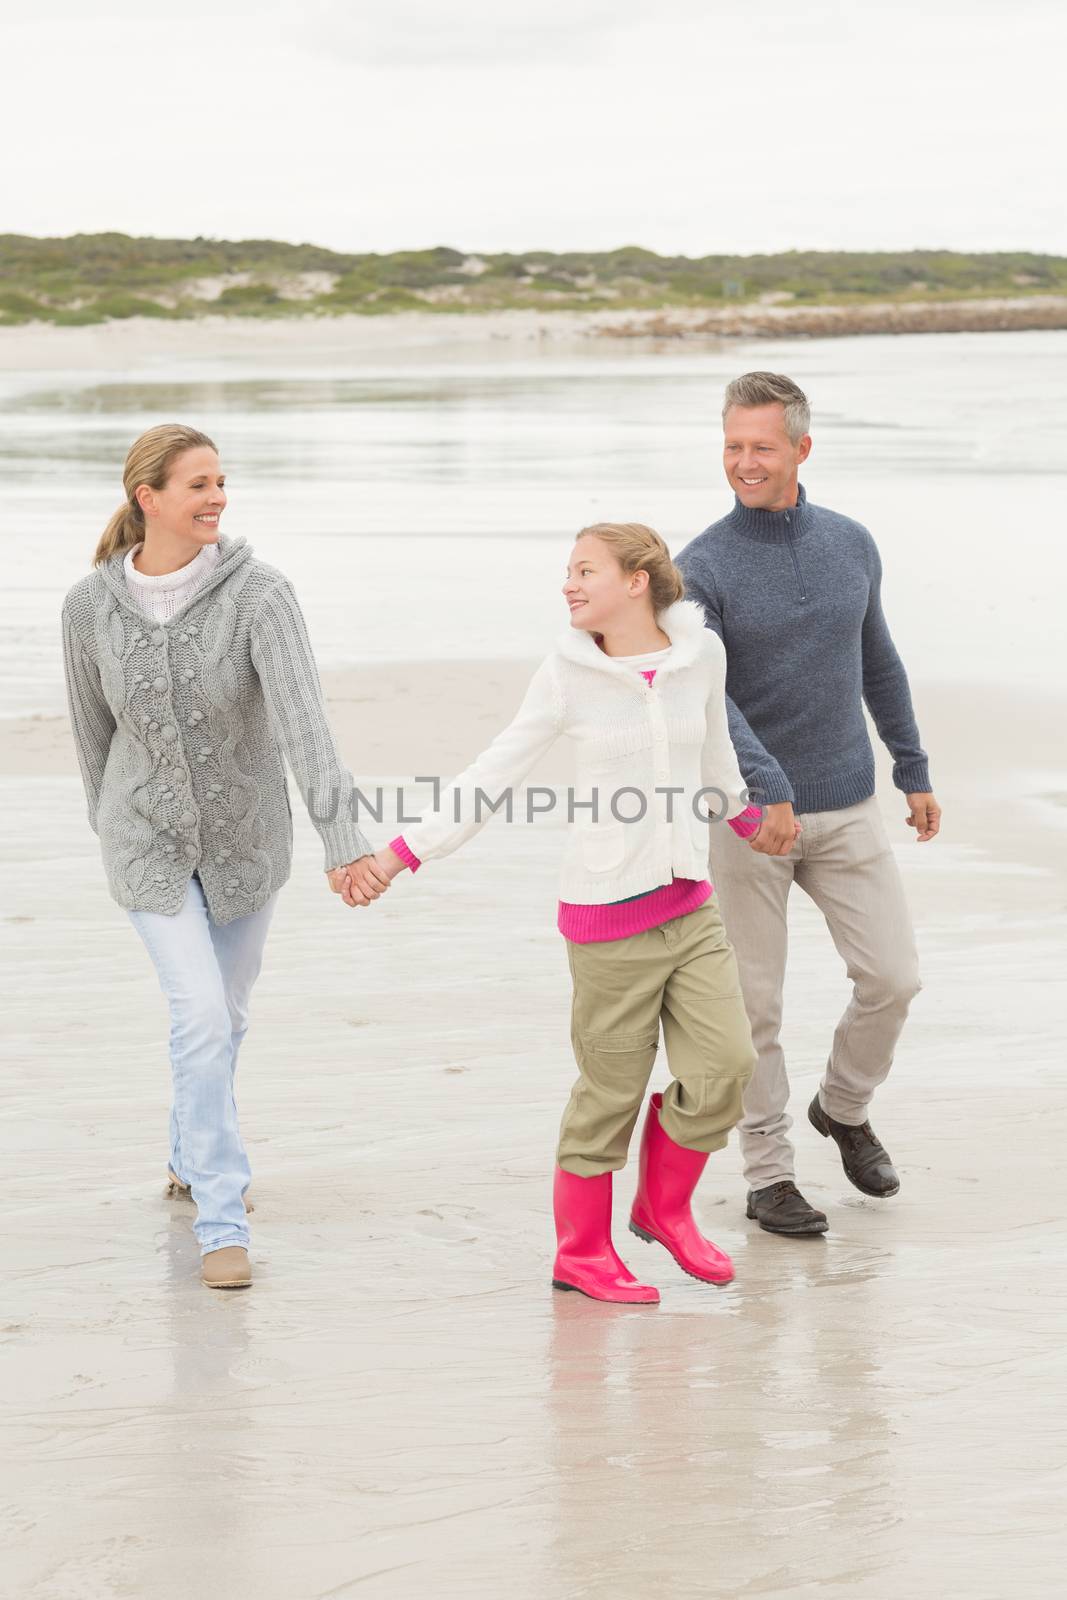 Family casually walking together at the beach